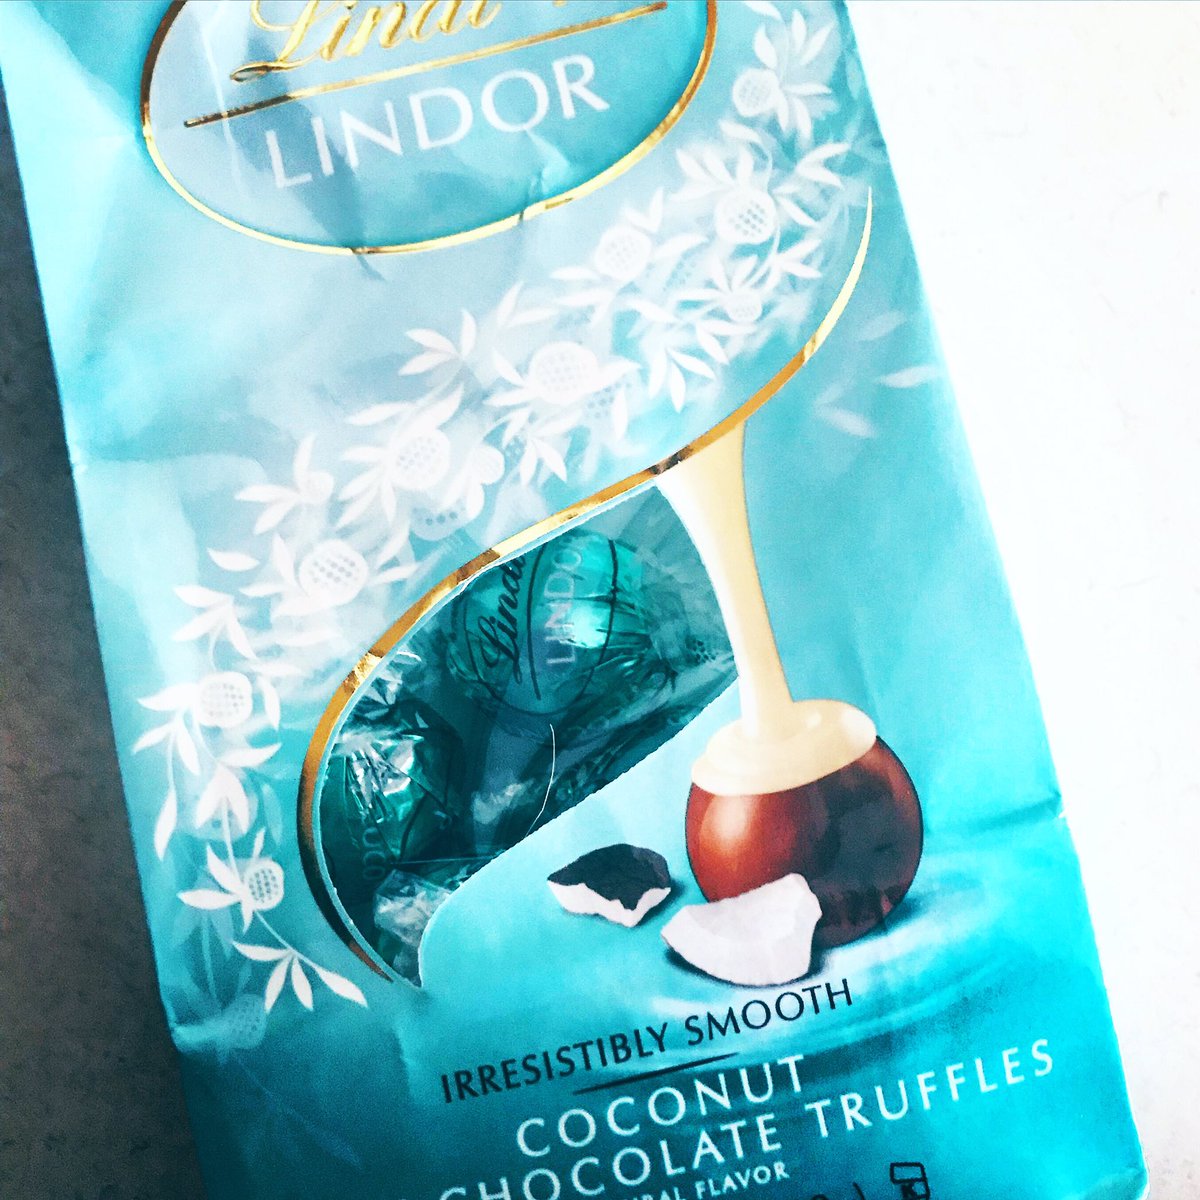 Found my new favorite!  If you like the taste of coconut, but not the consistency, you’ll love these!
@lindt_chocolate @lindt #chocolate #coconut #chocolatetruffles #zombieland @woodyharrelson @zombieland #betterthansnoballs #sorrynotsorry @hostess_snacks #convincemeotherwise